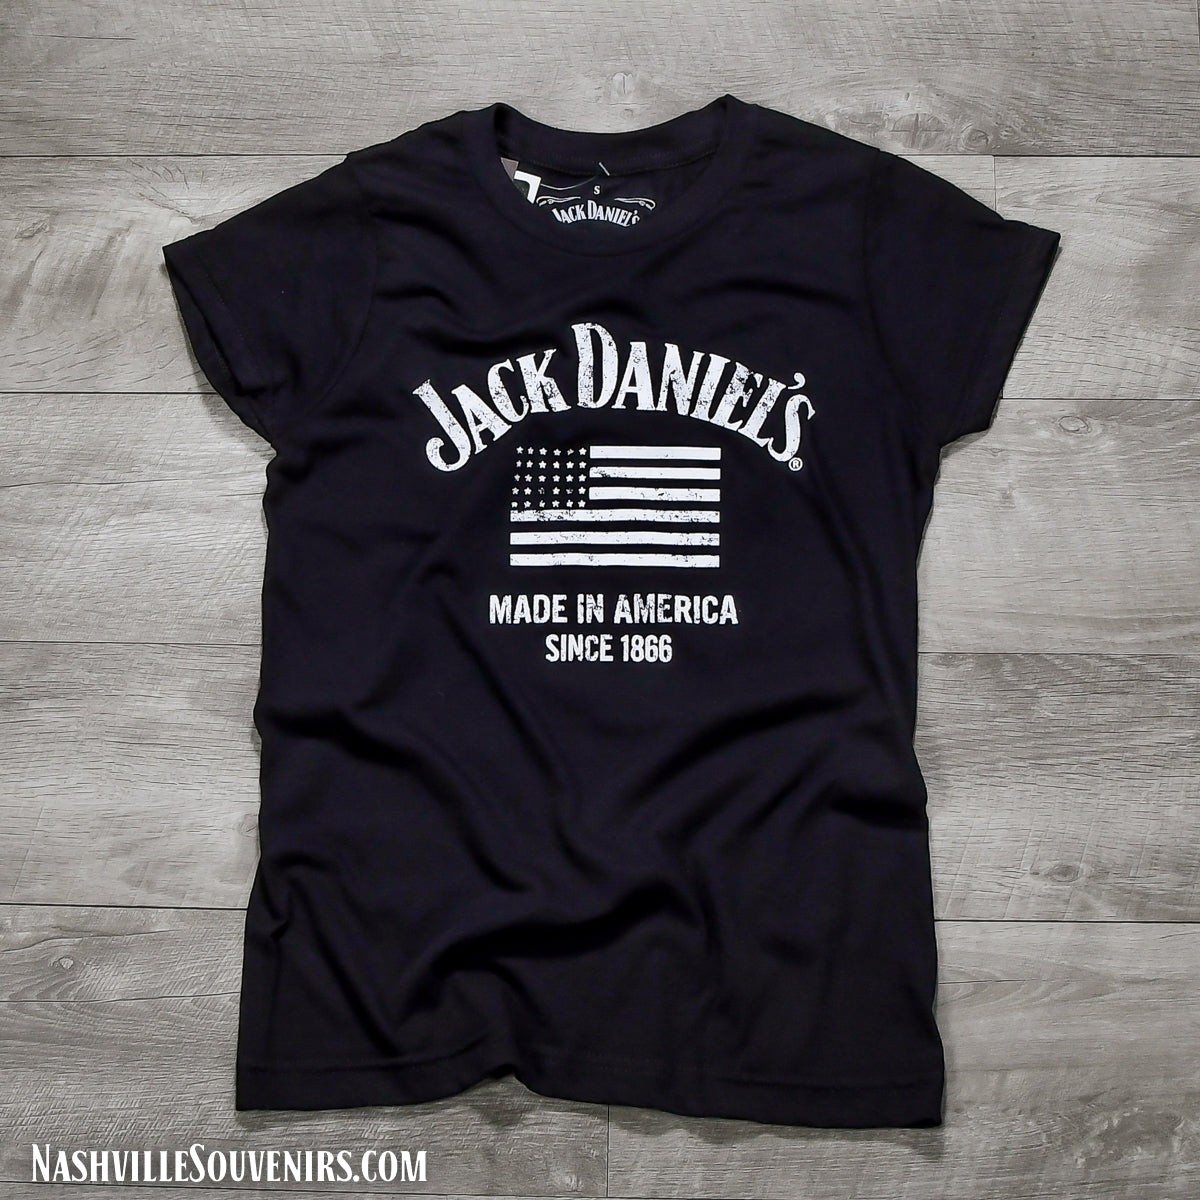 Officially licensed Women's Jack Daniels Made in America Flag T-Shirt in black. Get yours today with FREE SHIPPING on all US orders over $75!